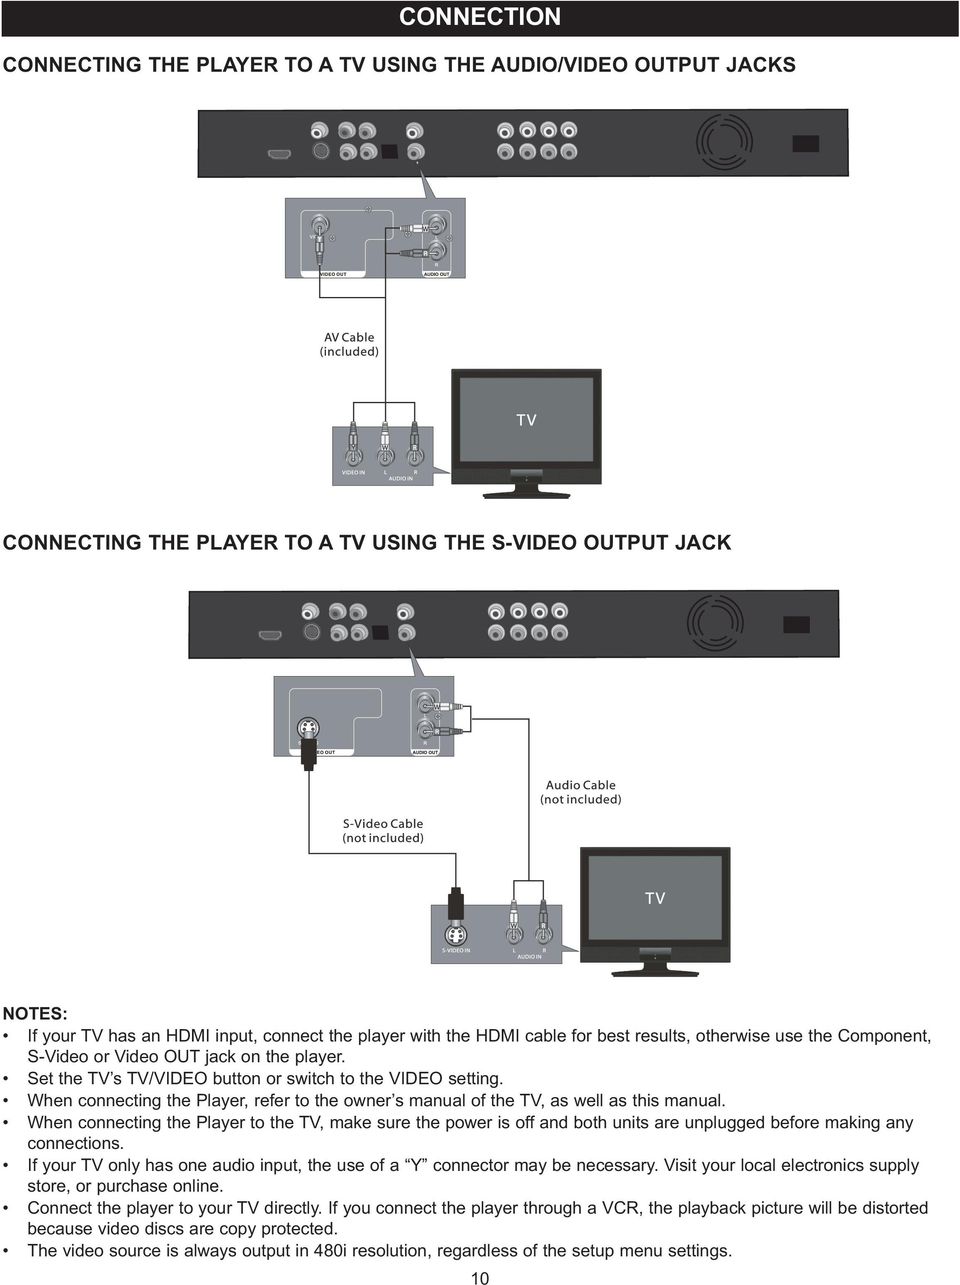 When connecting the Player, refer to the owner s manual of the TV, as well as this manual.